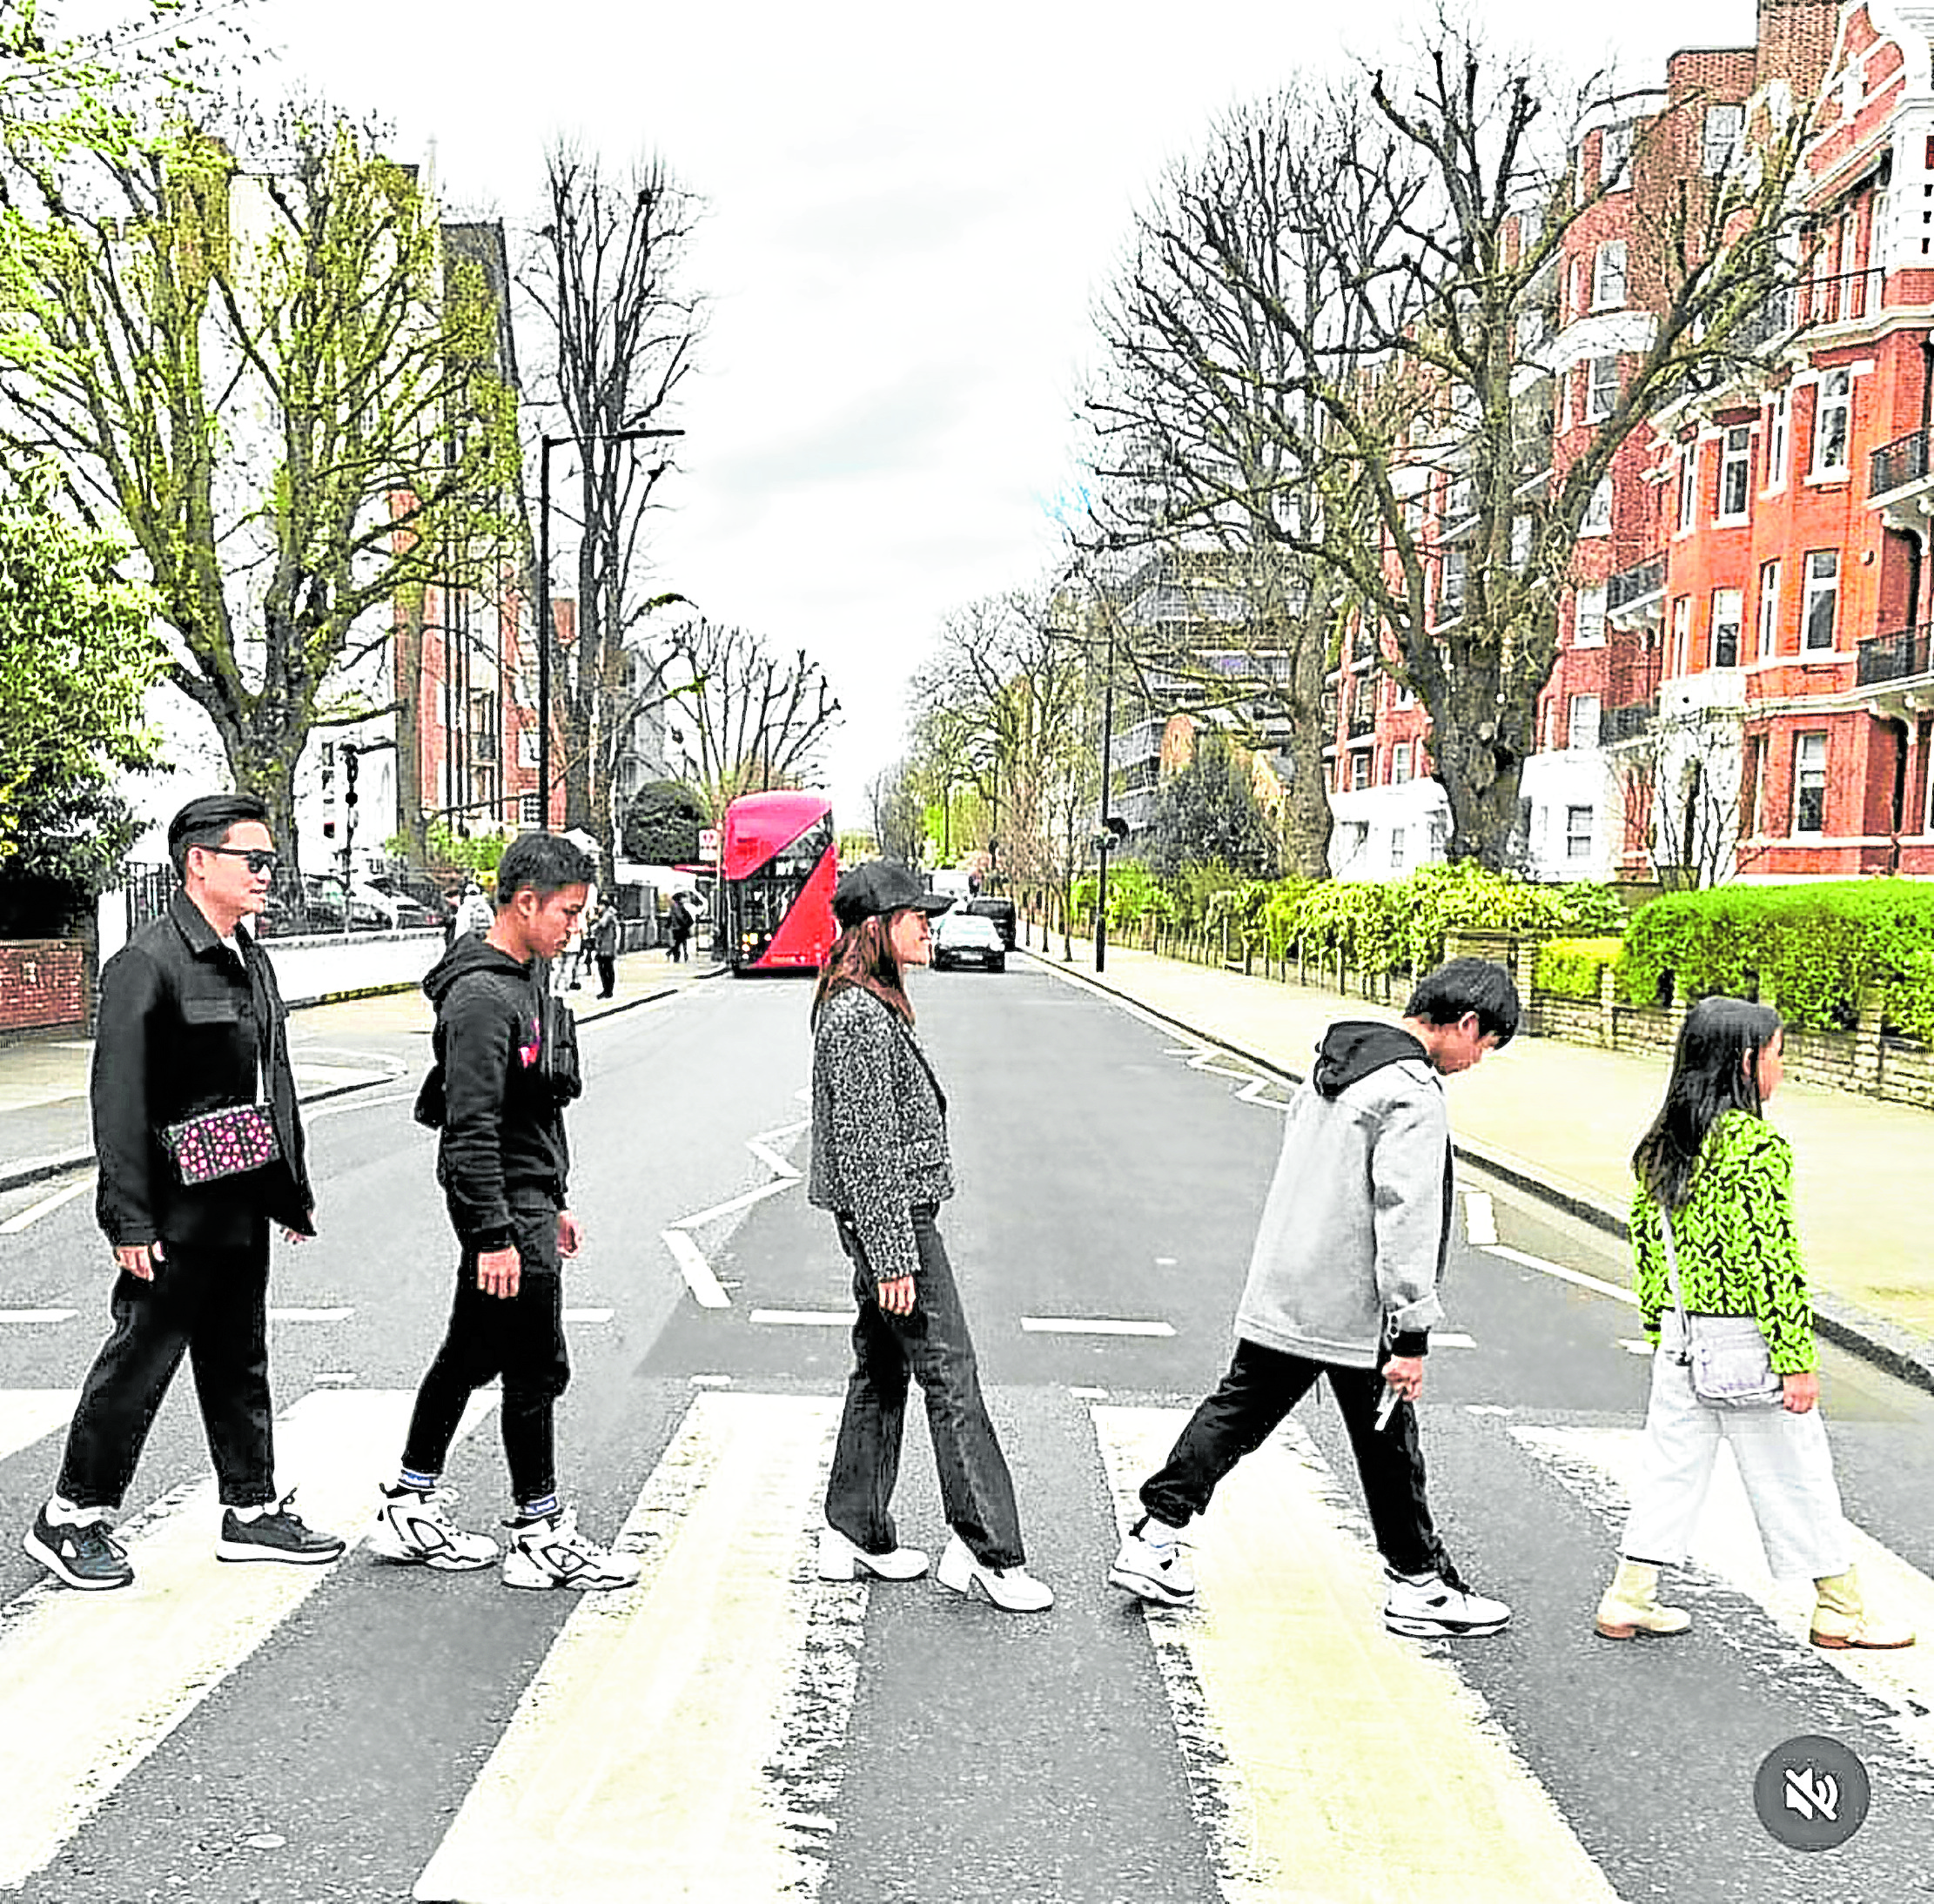 Dr. Aivee Teo and family channeling the Beatles at Abbey Roadin London —CONTRIBUTED PHOTOS